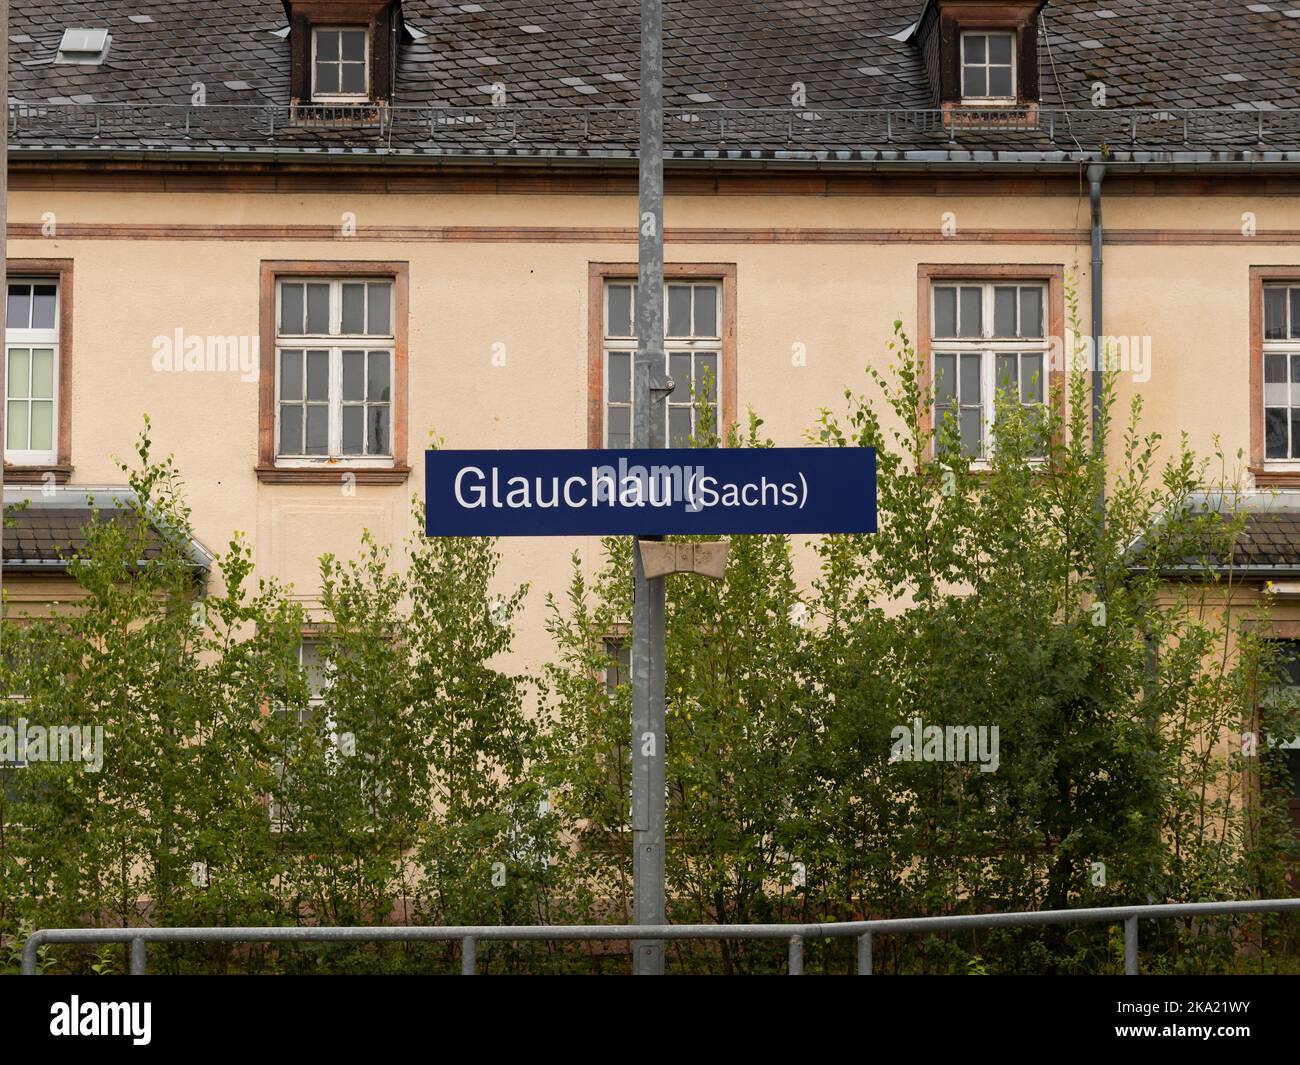 Name board of the train station in Glauchau, Saxony. The blue metal plate with white letters. Traveling by the public transportation service. Stock Photo